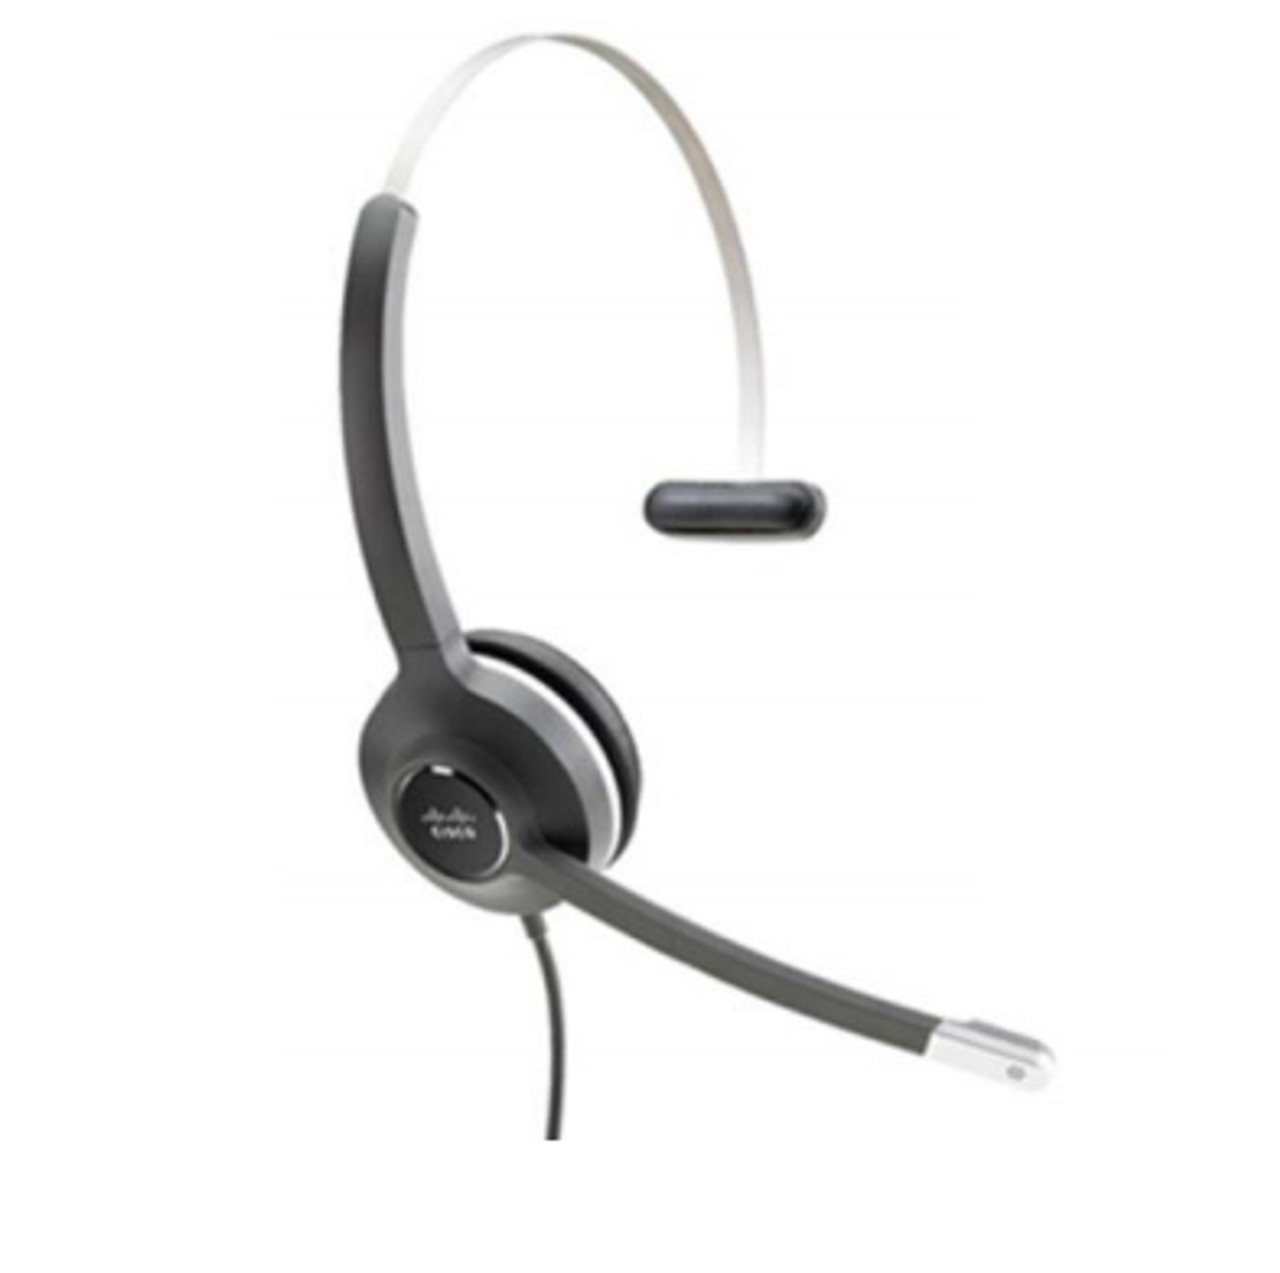 Cp-Hs-W-531-Usbc= | Cisco | Headset 531 Wired Single + Usbc Headset Adapter